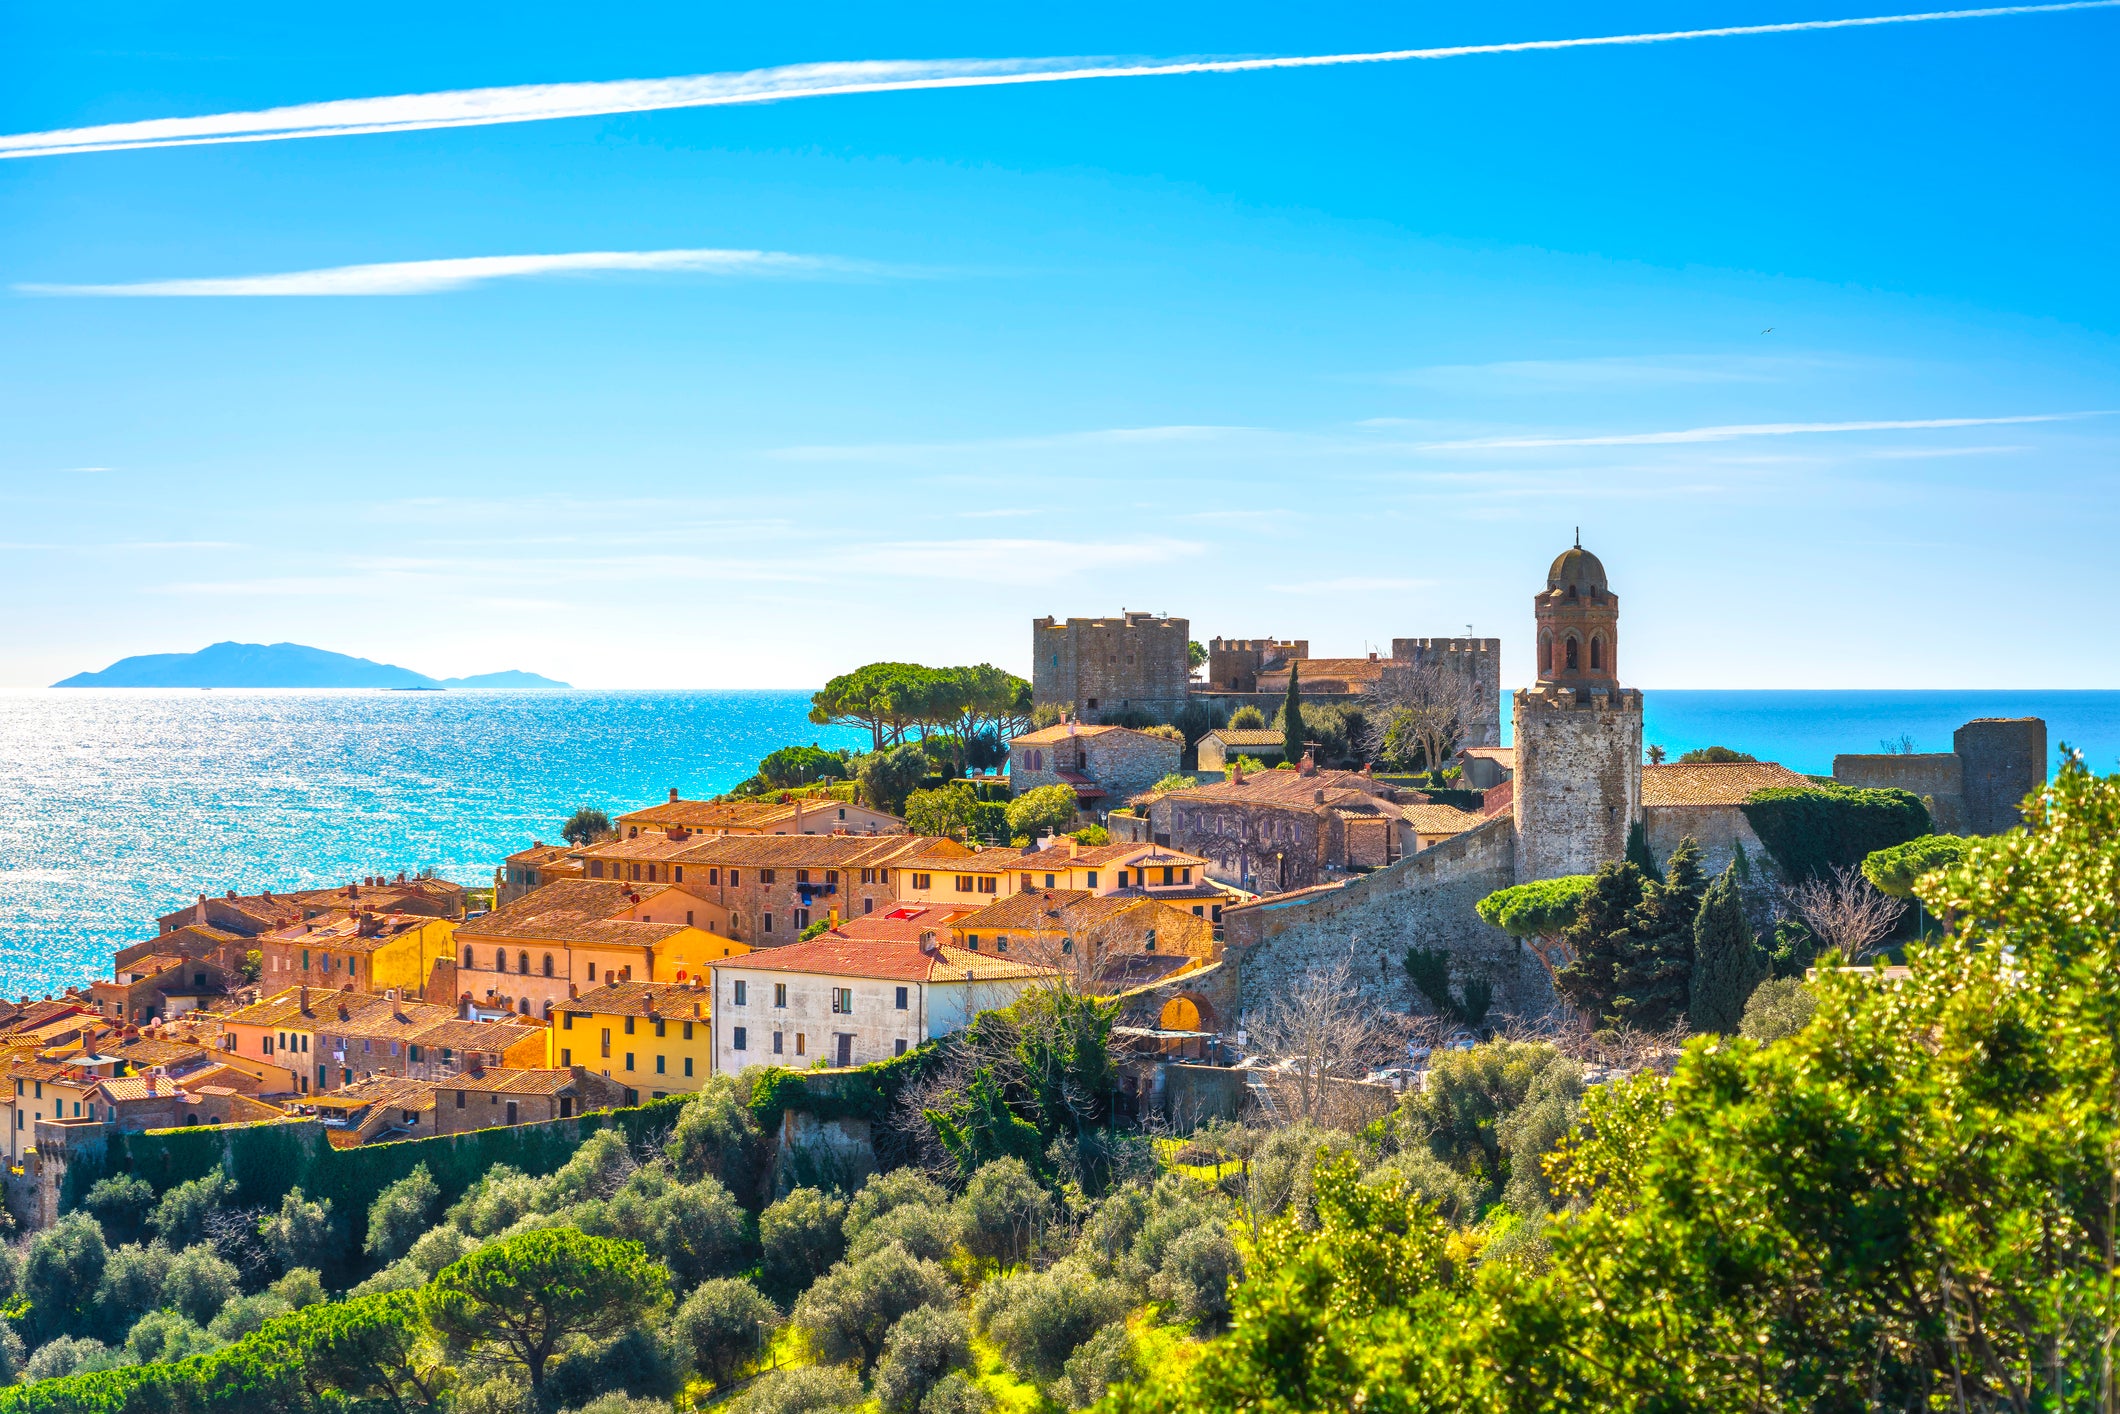 Find romance in the old towns and culinary delights of Tuscany